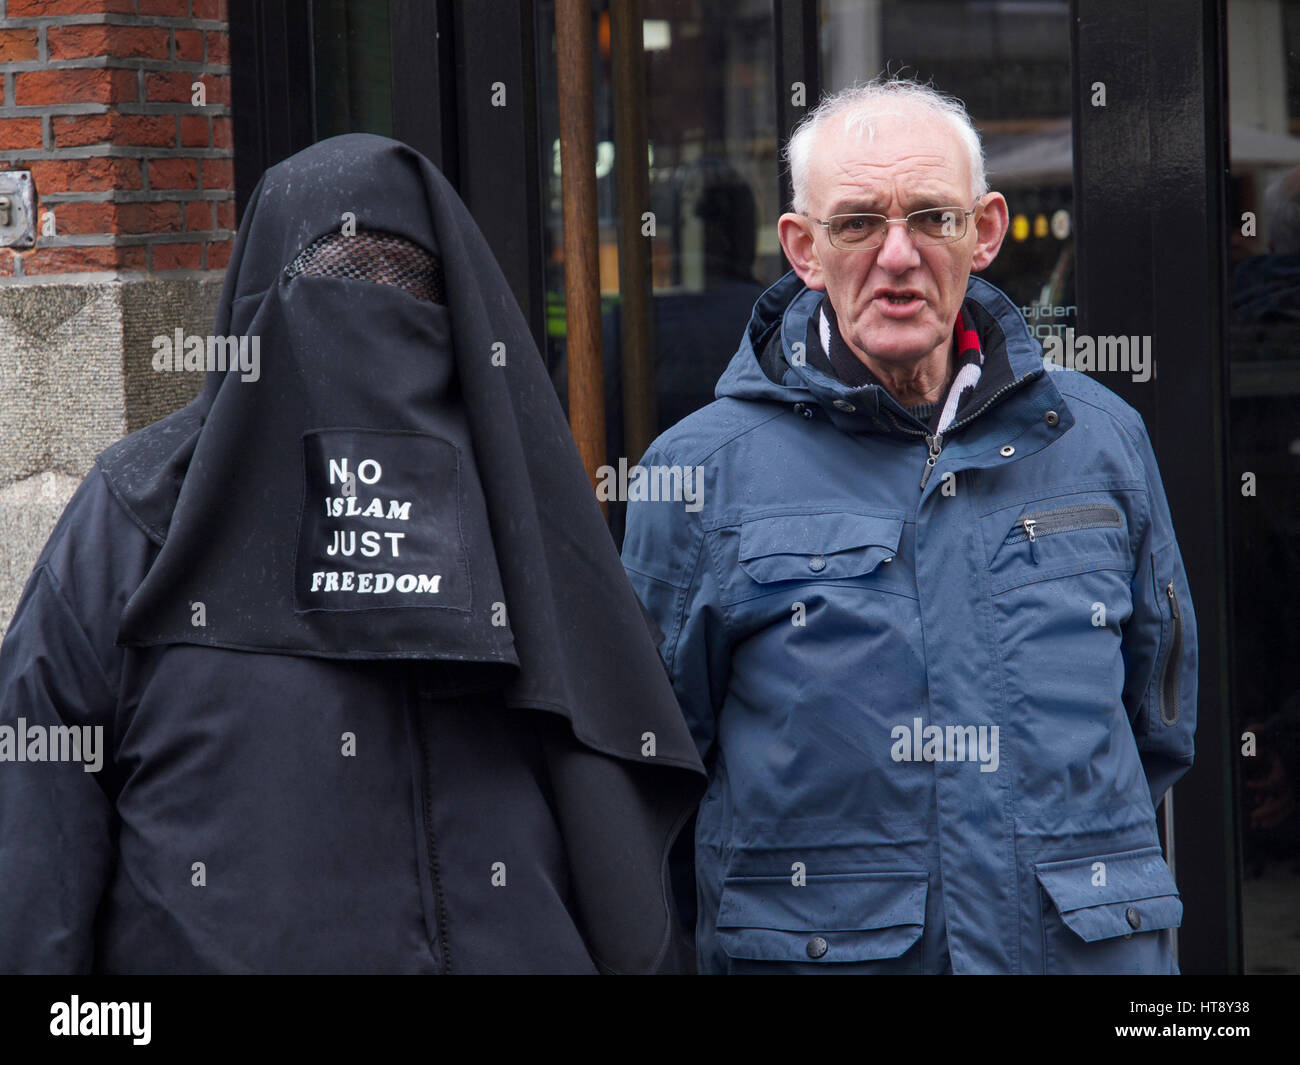 Pegida anti-islam protesting couple. No islam just freedom, the message on the burqa reads. Breda, the Netherlands Stock Photo